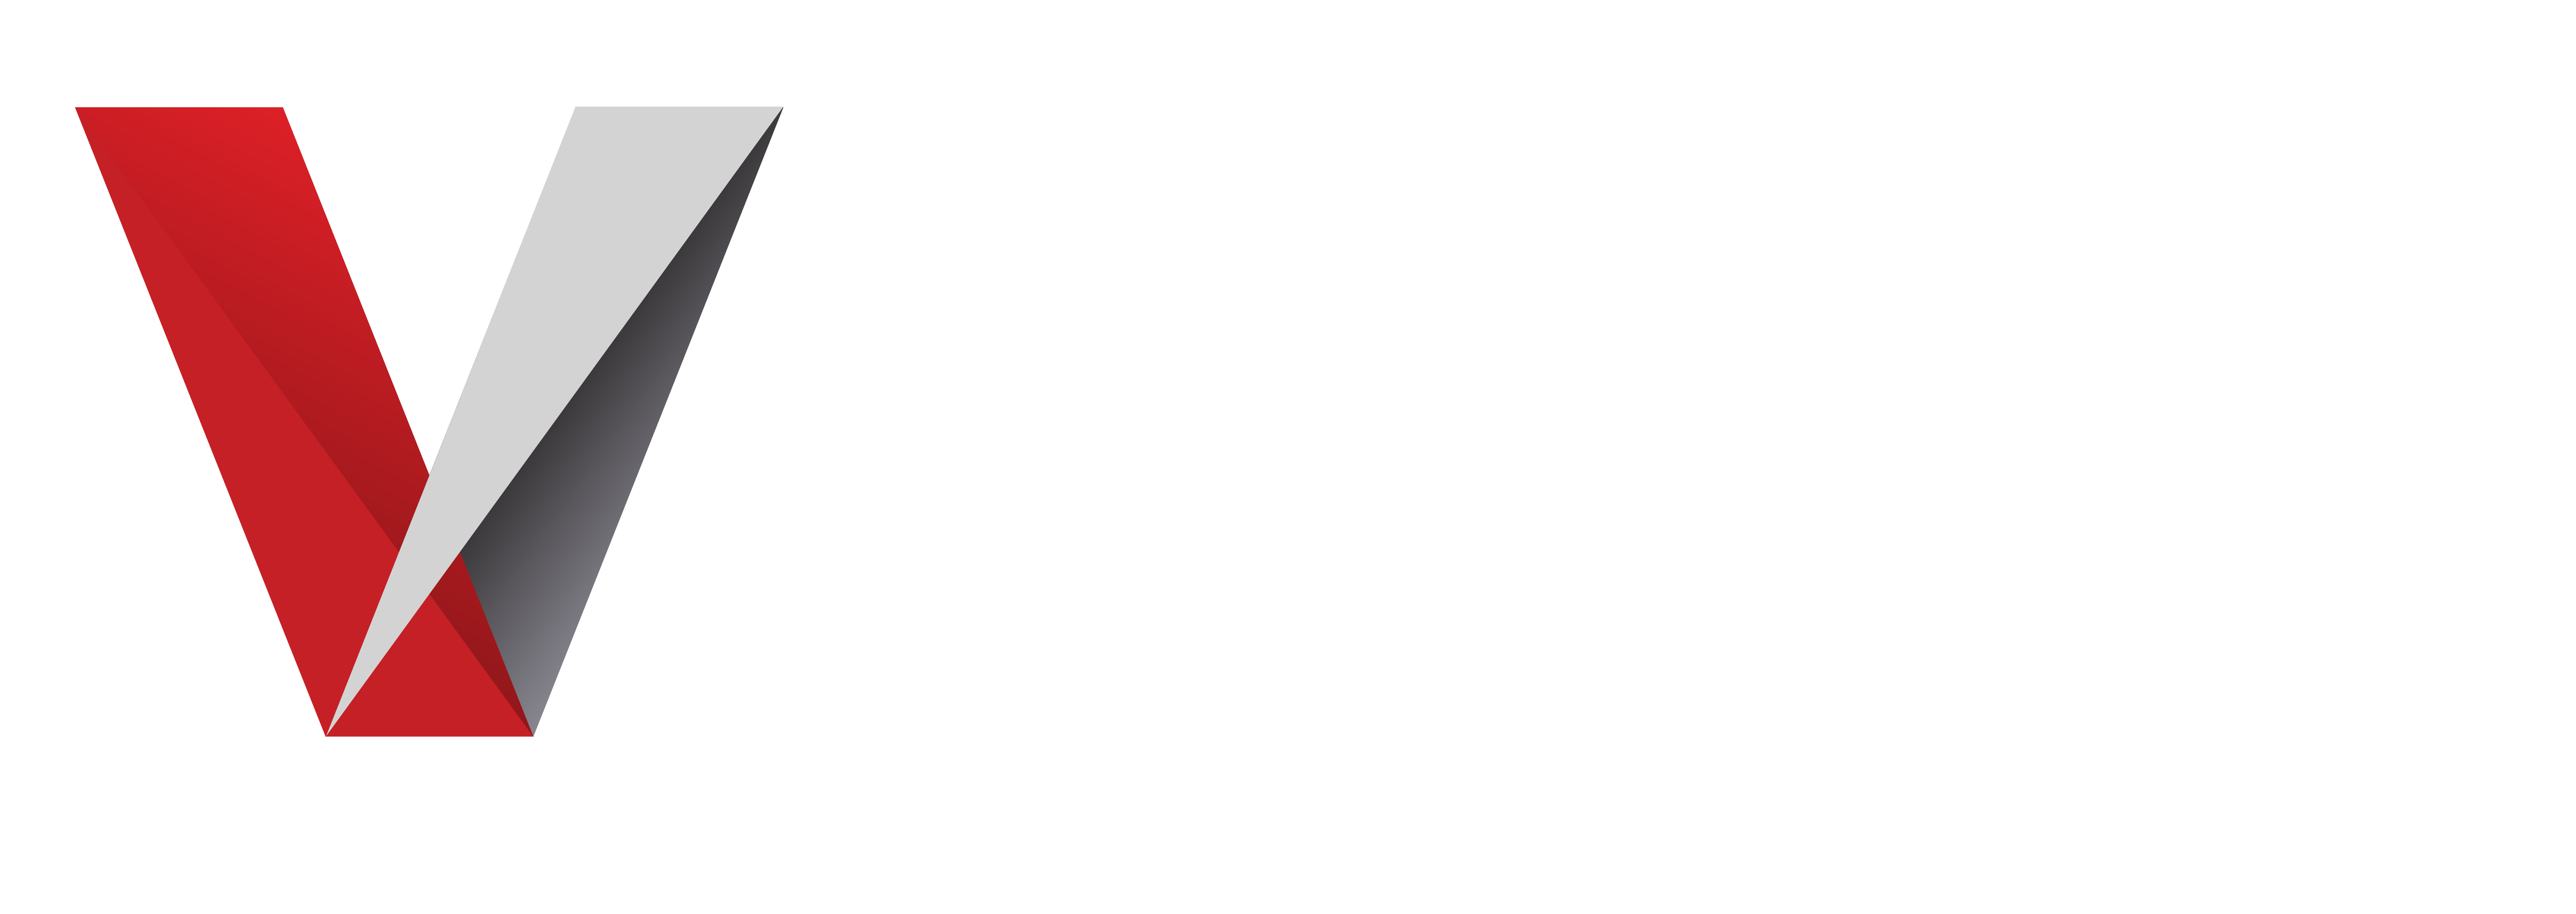 Velocity Business Solutions | Velocity Business Solutions